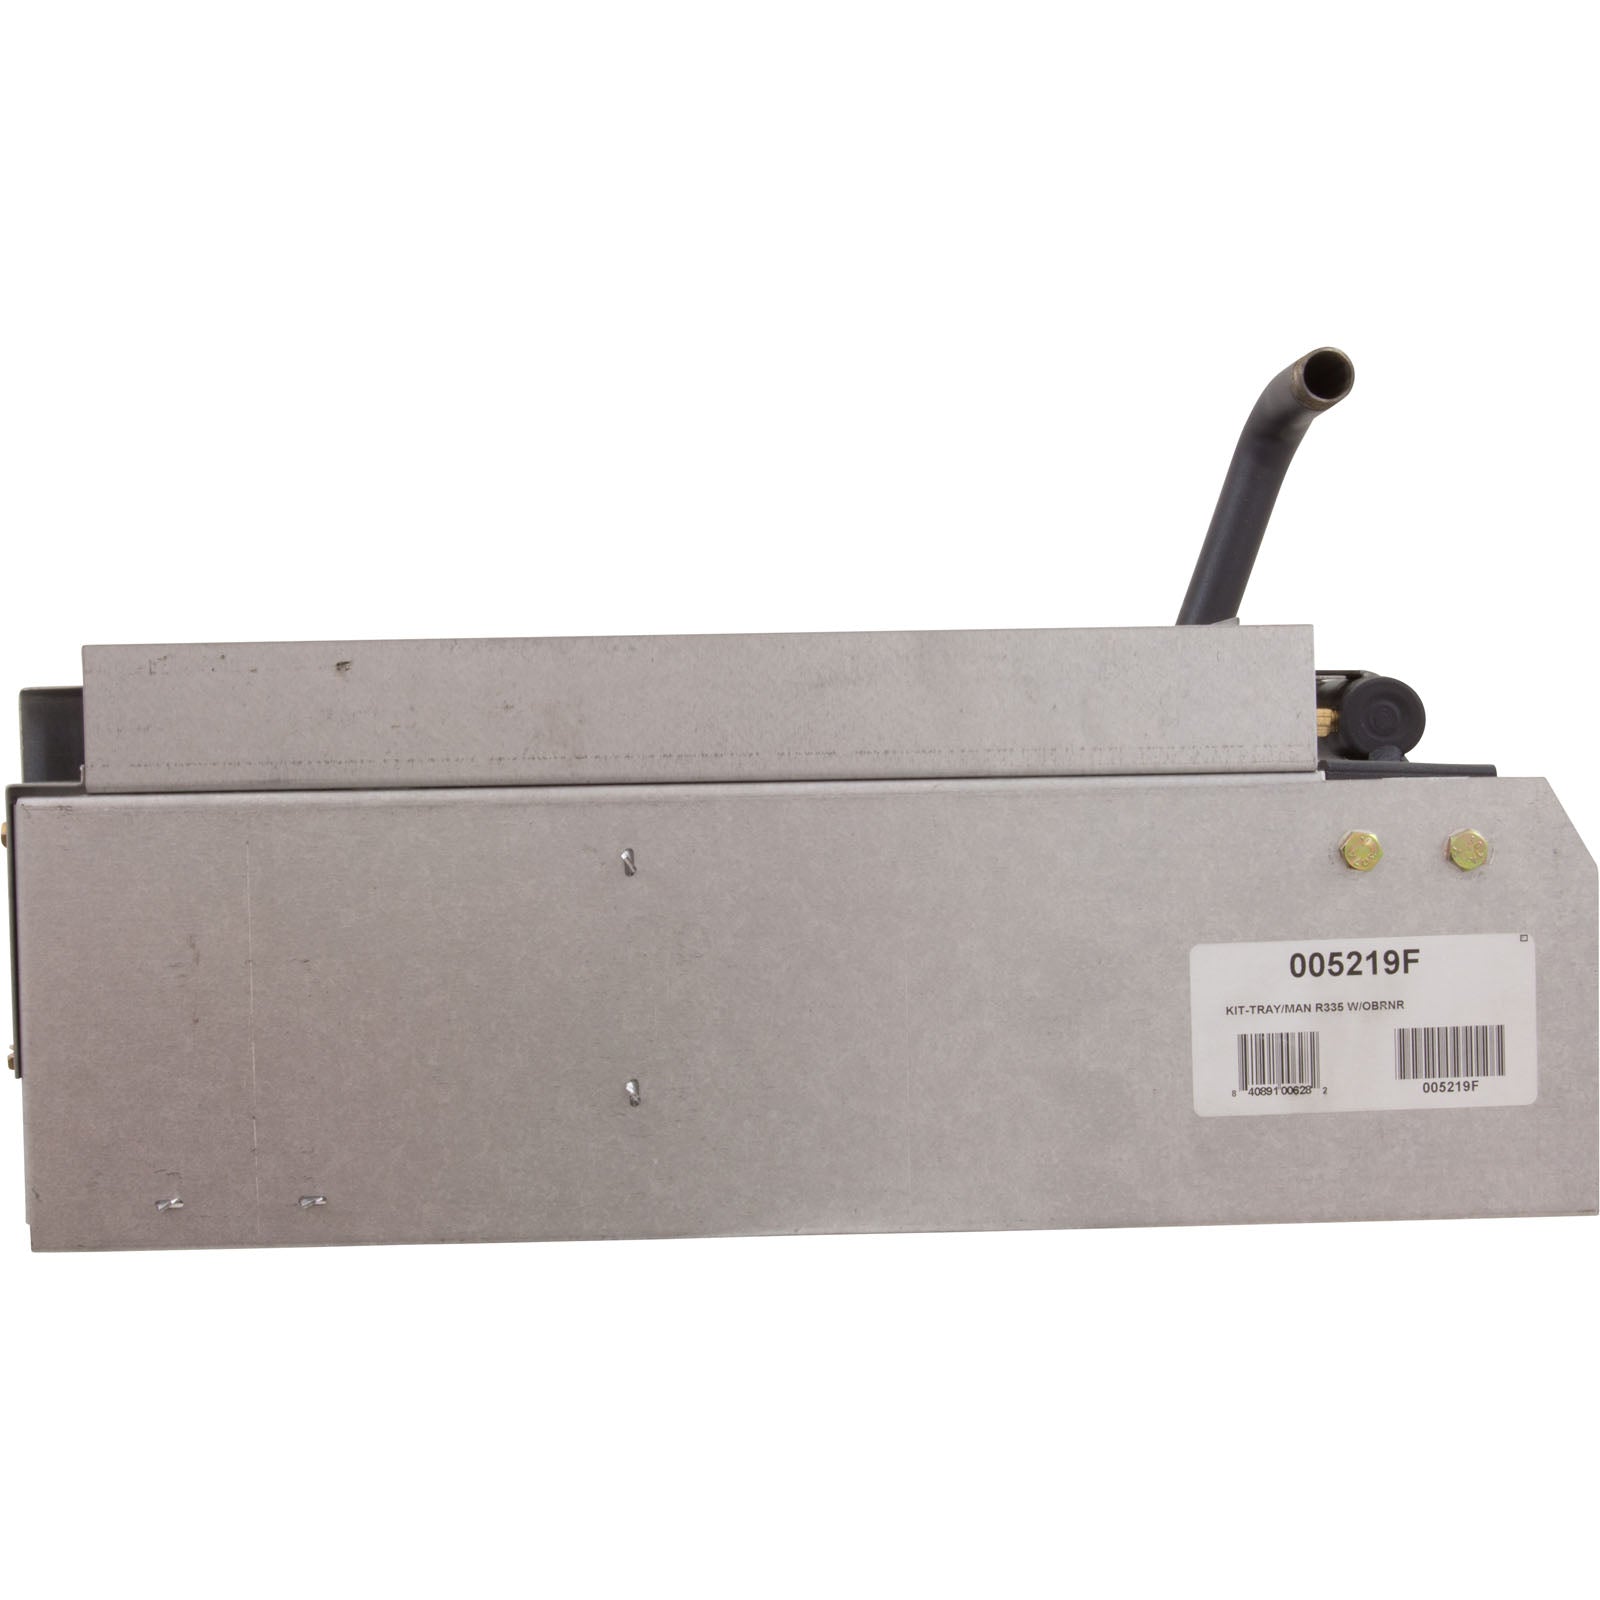 Burner Tray with out Burner, Sea Level, Raypak 005219F